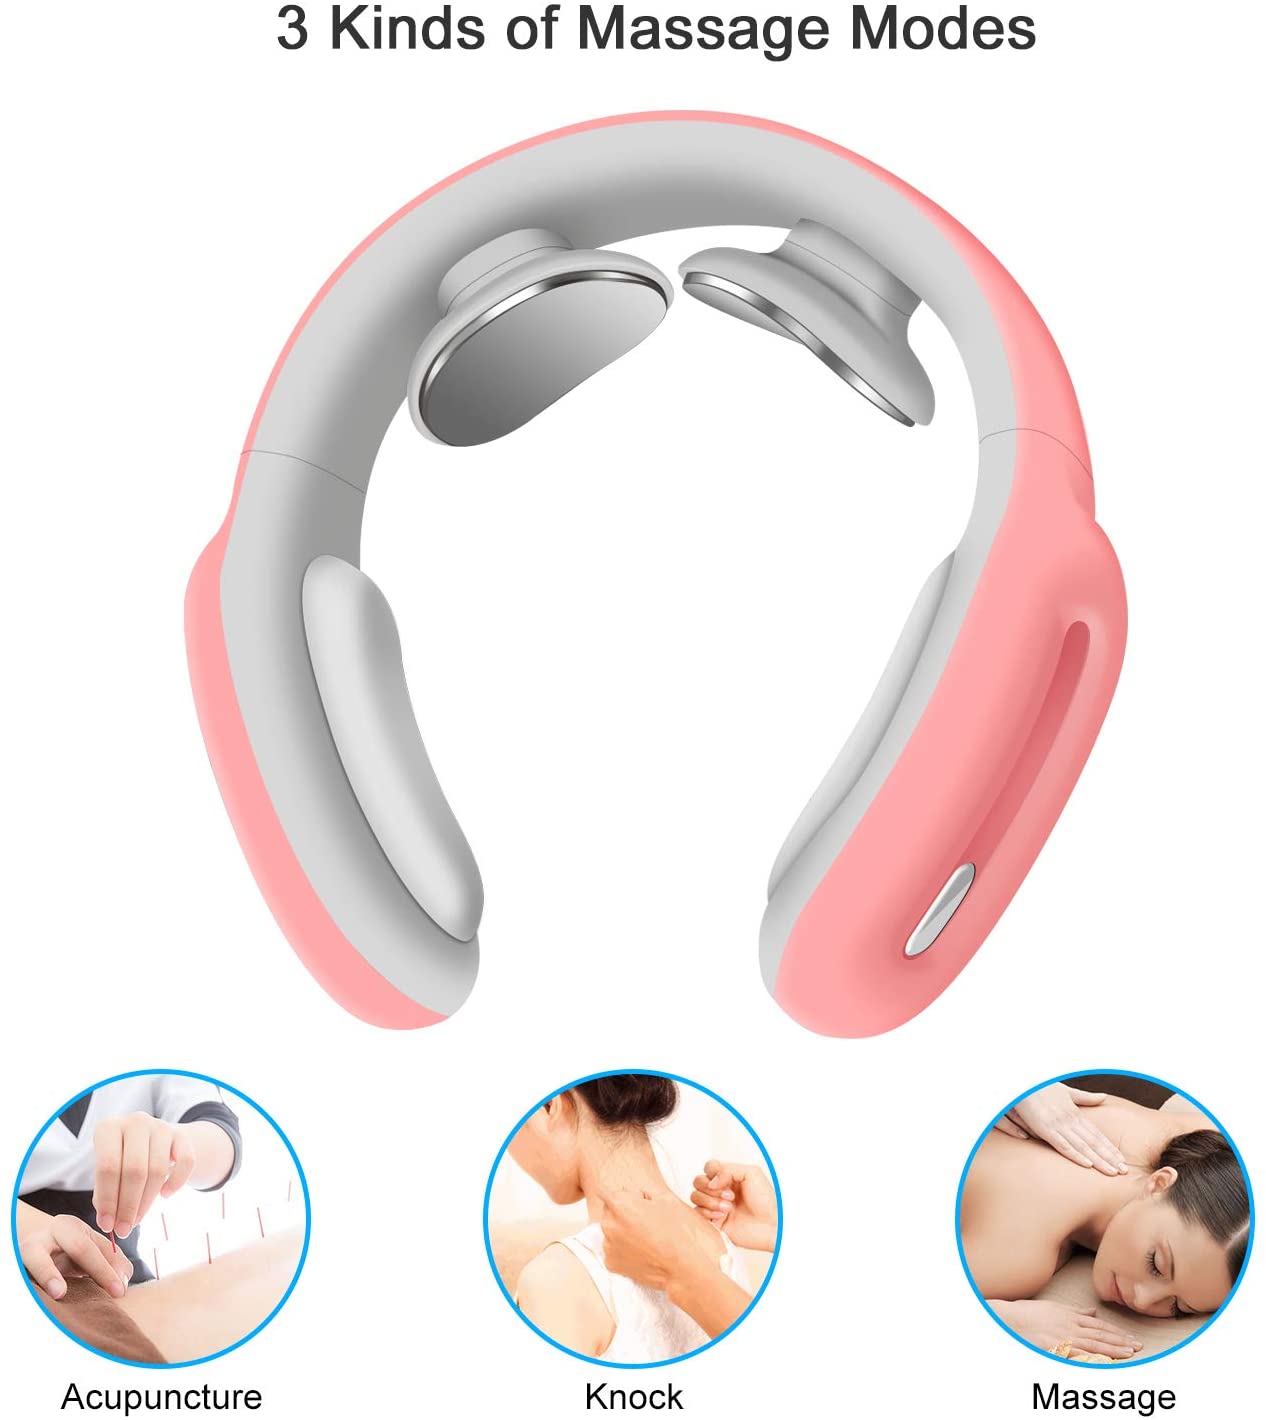 Cotsoco Neck Massager, Intelligent Neck Massage with Heat, 3 Modes 15 Levels Deep Tissue Electric Massager Use at Home Office Car for Pain Relief